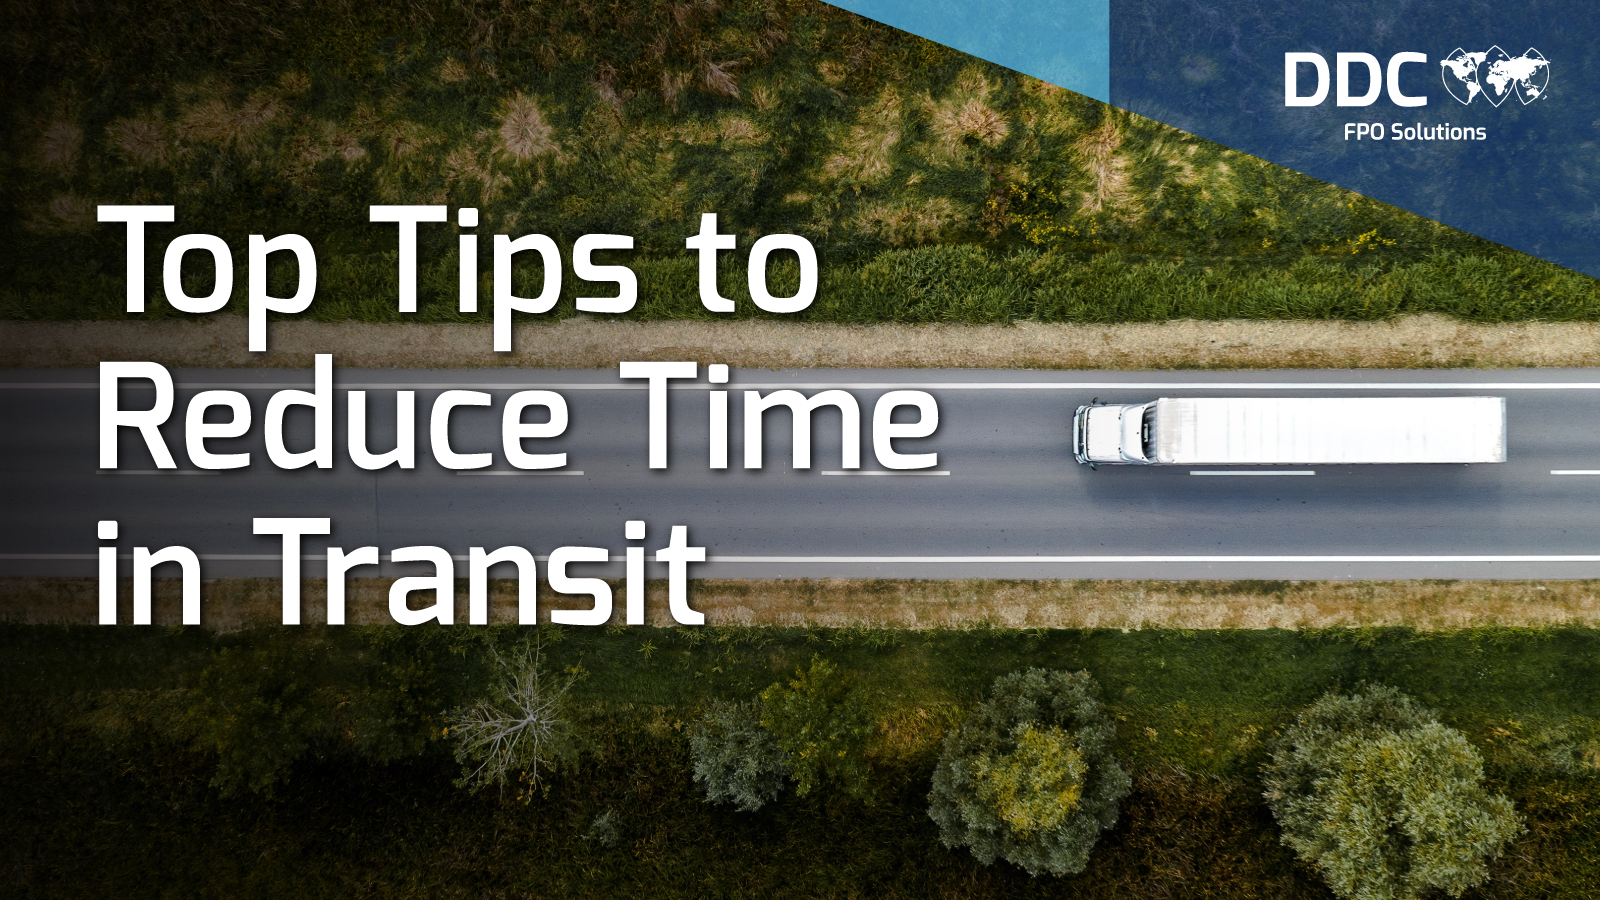 Top Tips to Reduce Time in Transit